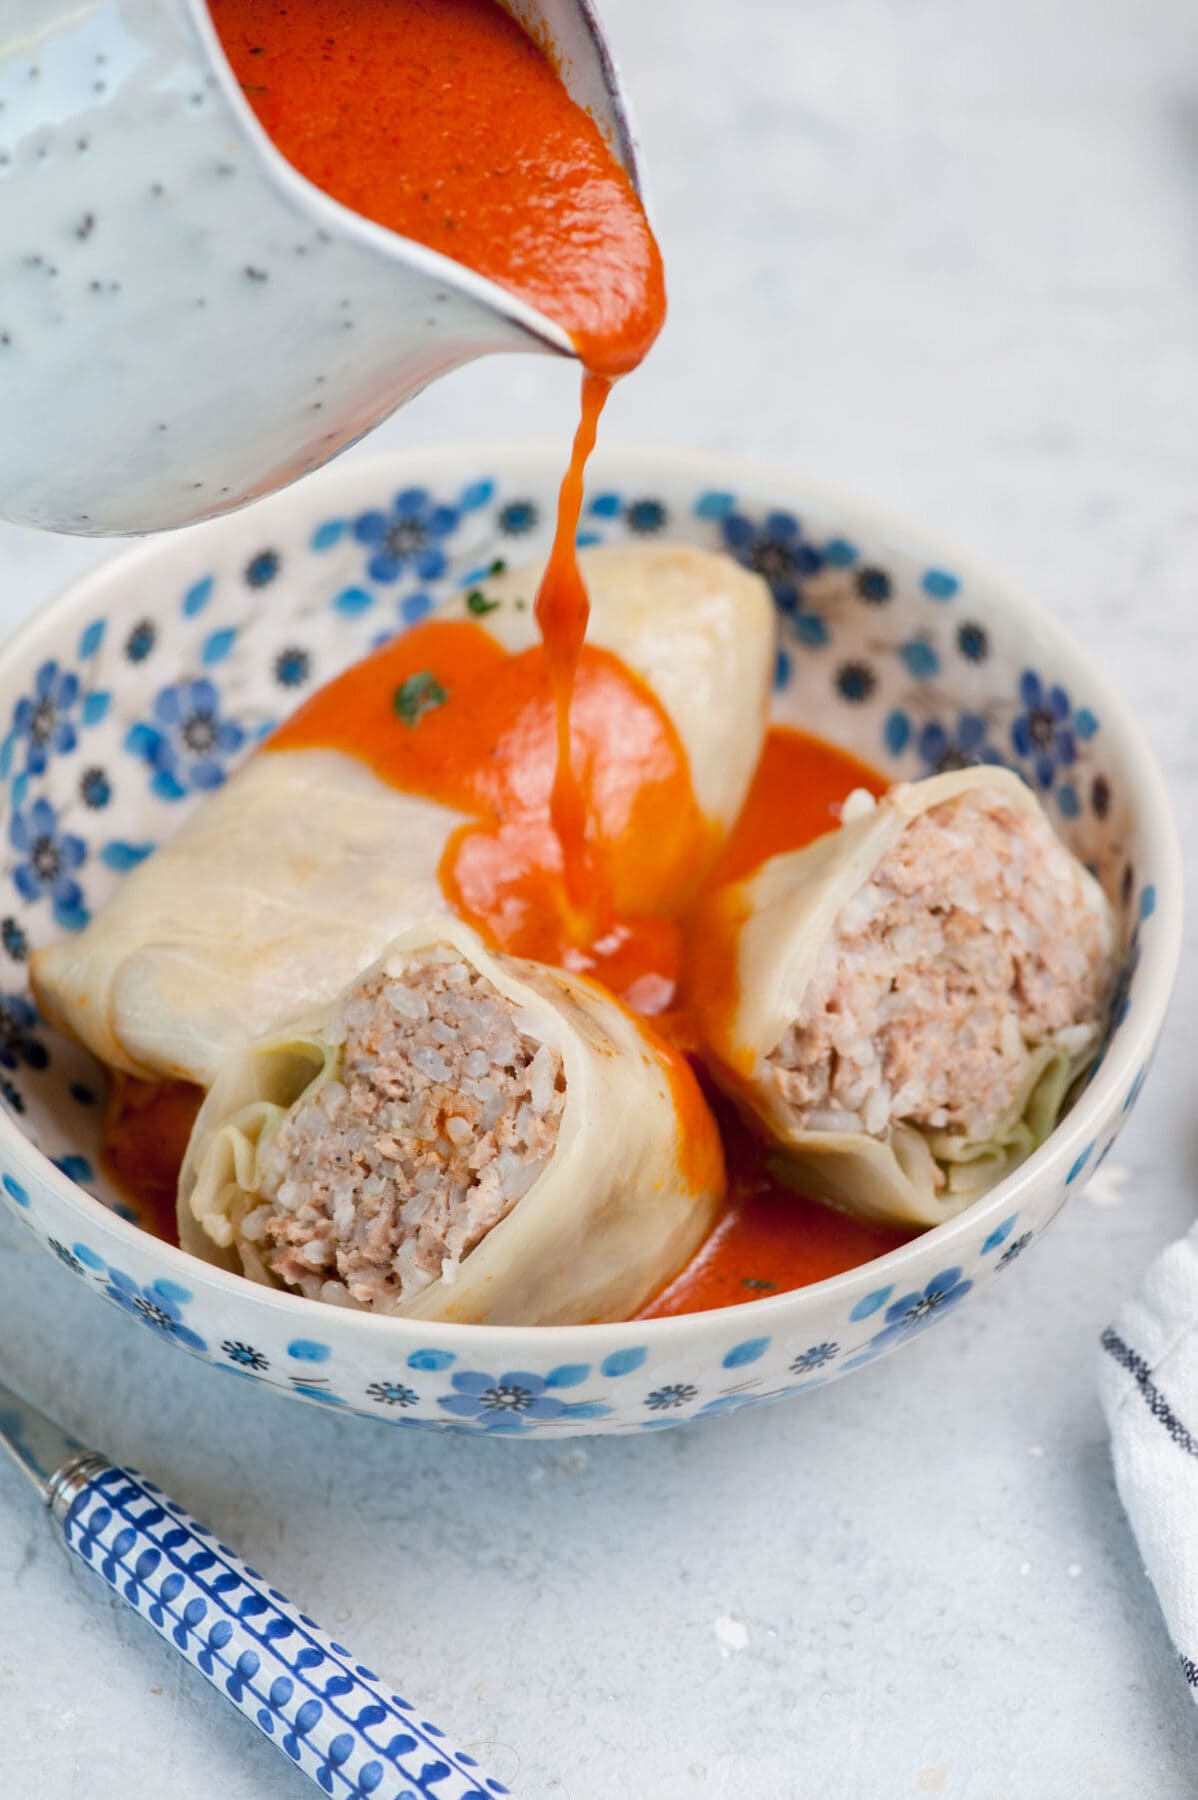 Tomato sauce is being poured over stuffed cabbage rolls in a white-blue bowl.